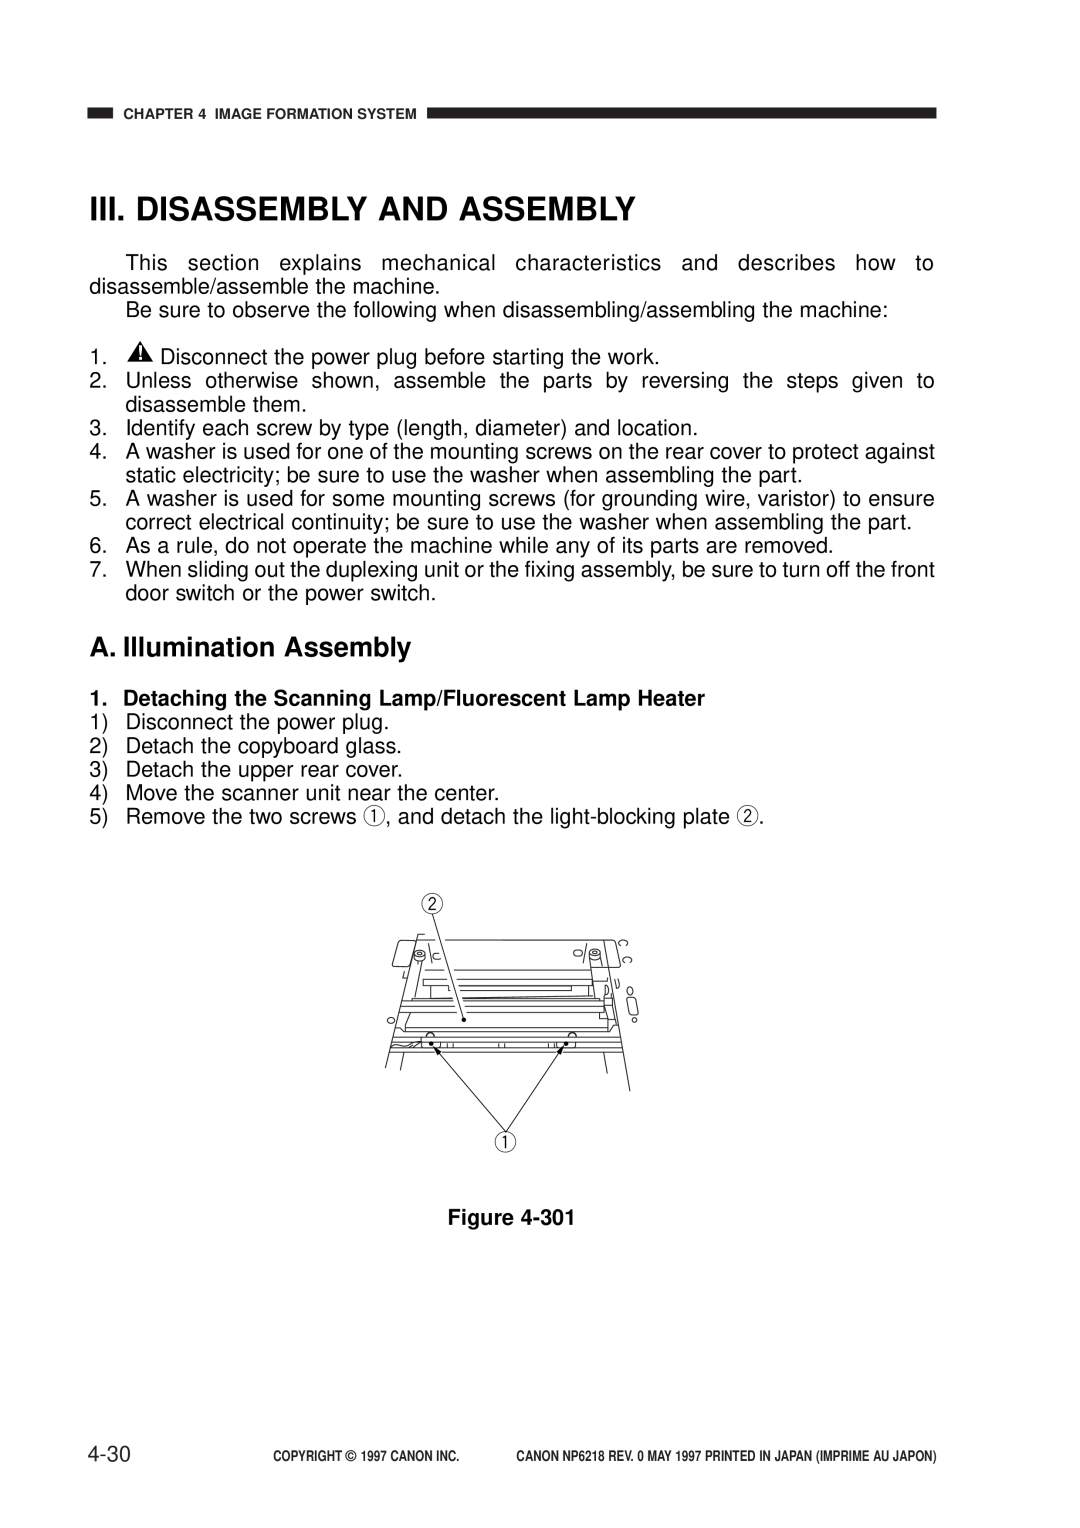 Canon NP6218 Iii. Disassembly And Assembly, A. Illumination Assembly, Detaching the Scanning Lamp/Fluorescent Lamp Heater 